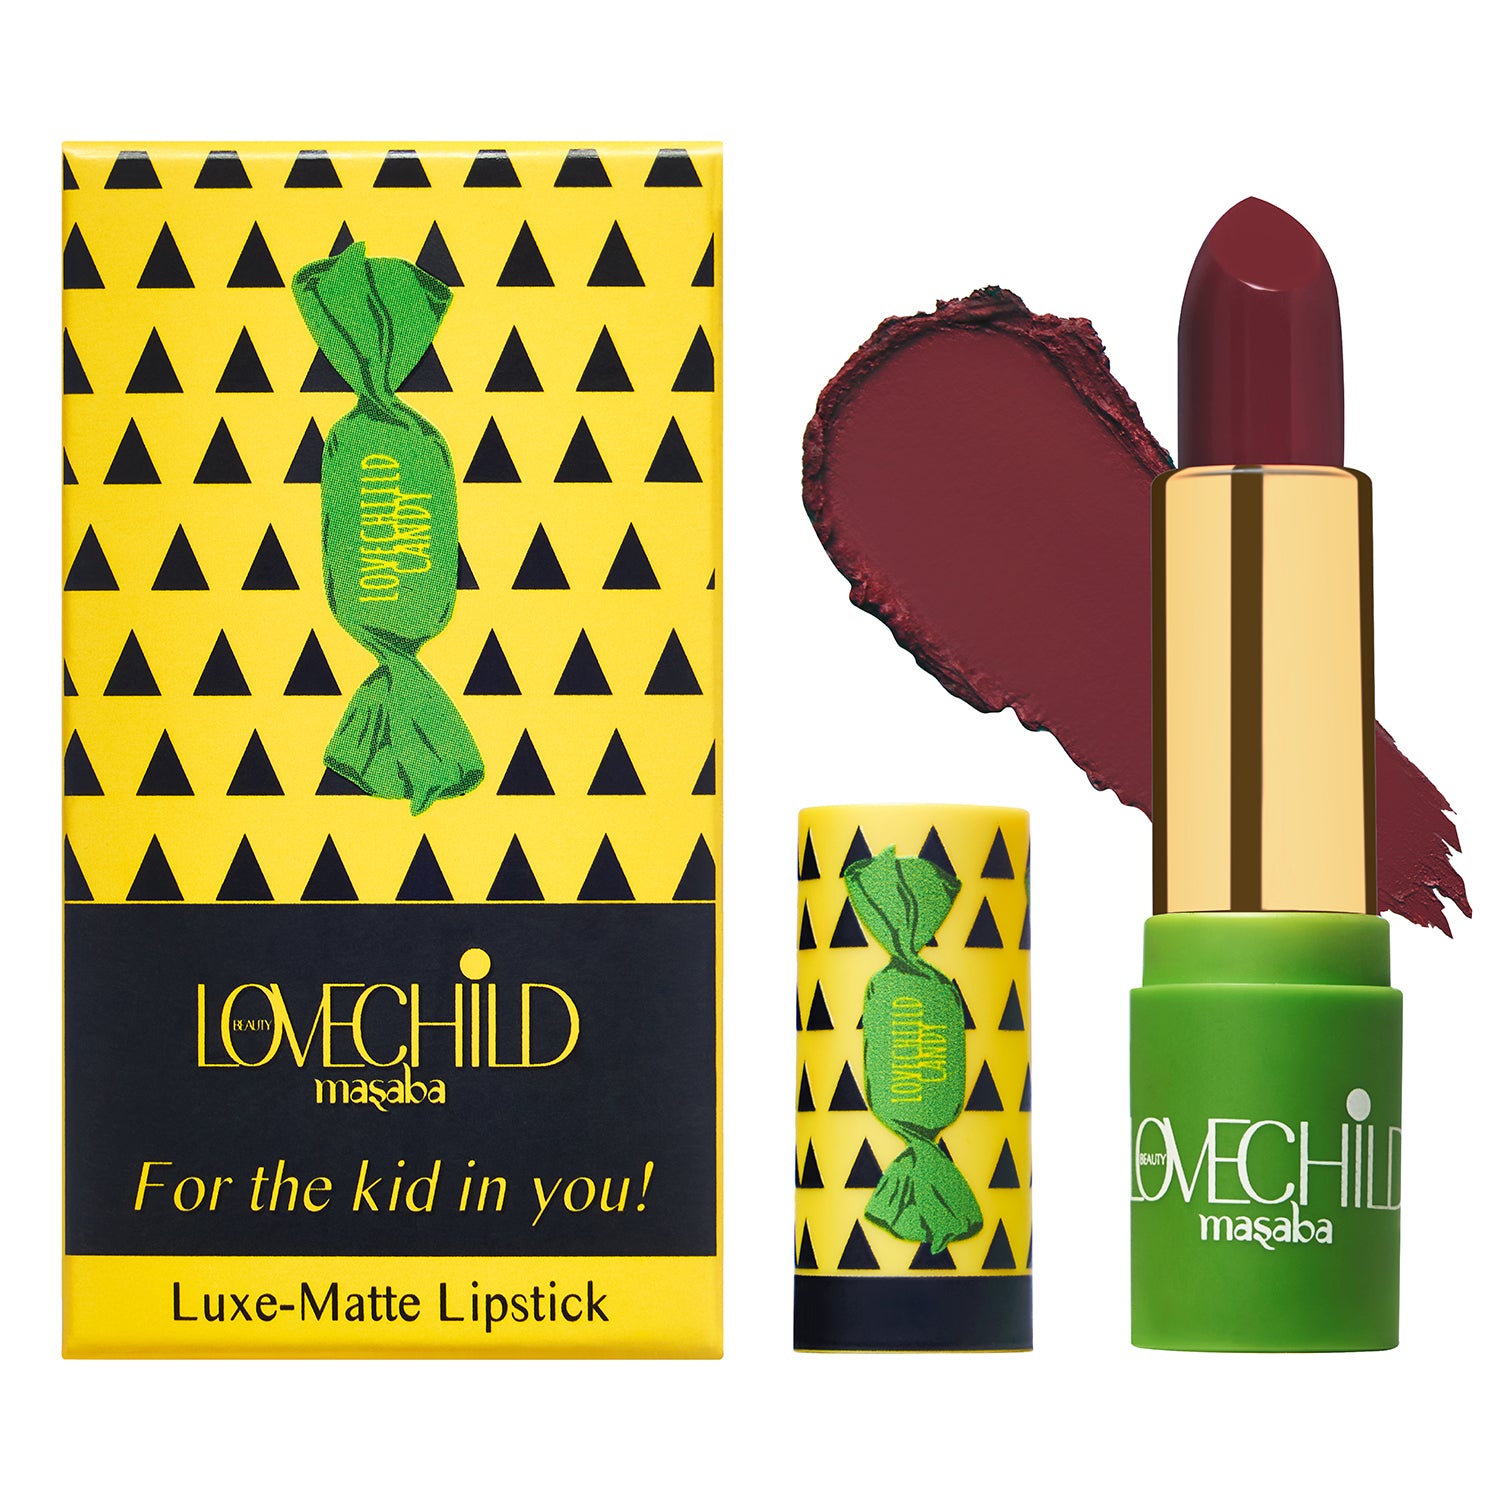 LoveChild Masaba - For the Kid in You! - 12 Paan-tastic - Luxe Matte Lipstick